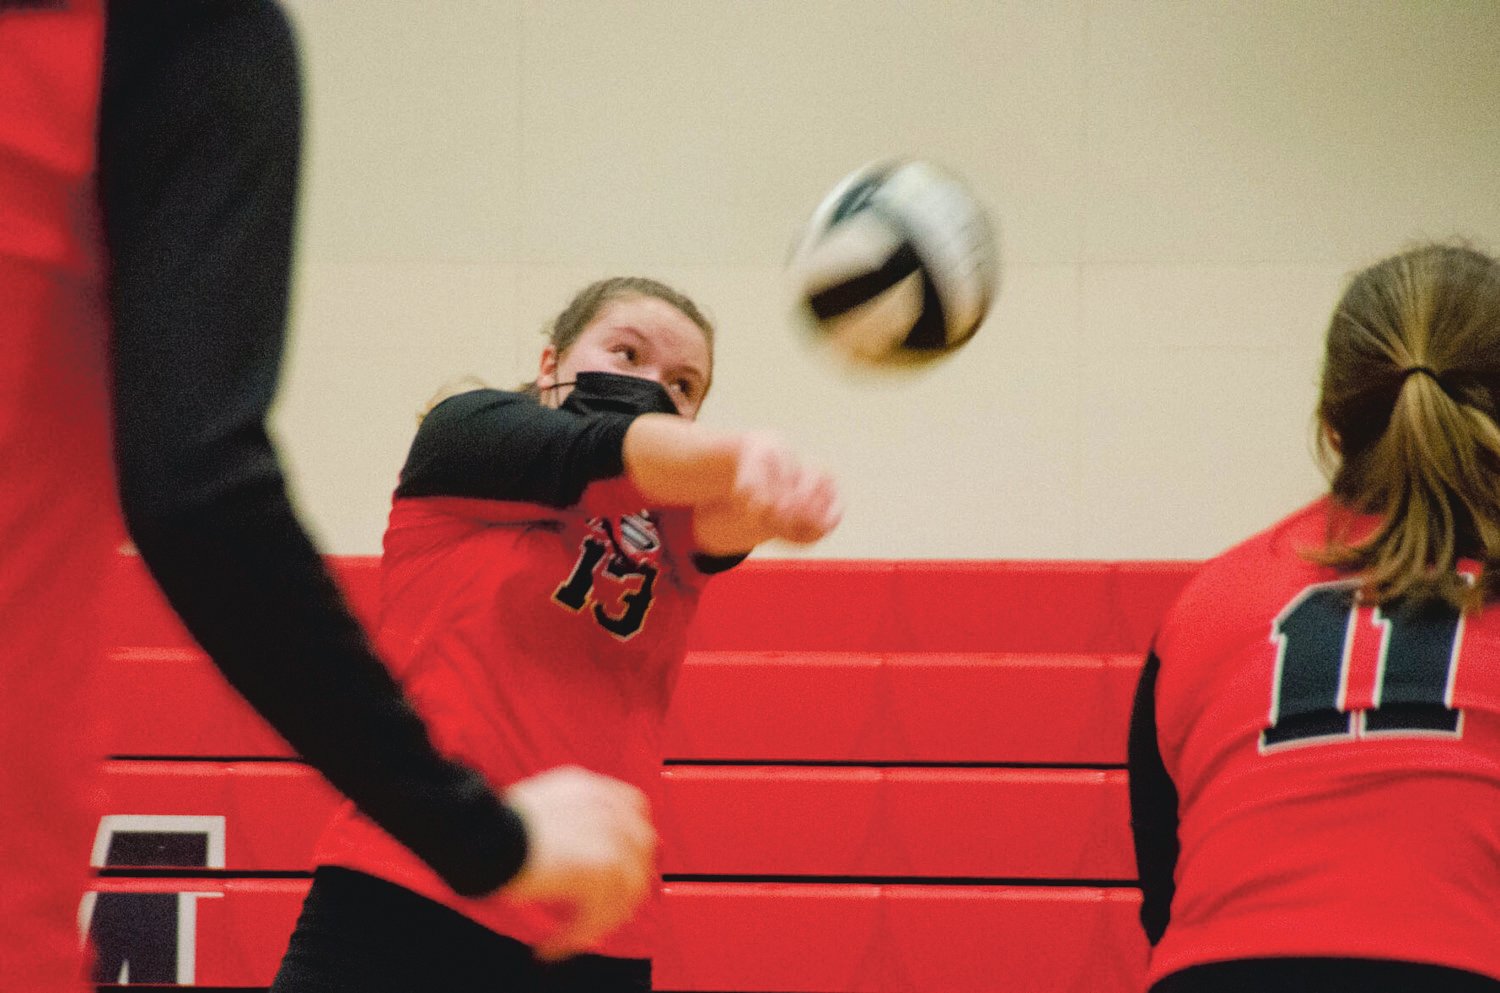 Molly Corak (left) is seen in her defensive roll at one of Yelm High School’s volleyball games during the 2020-21 season.